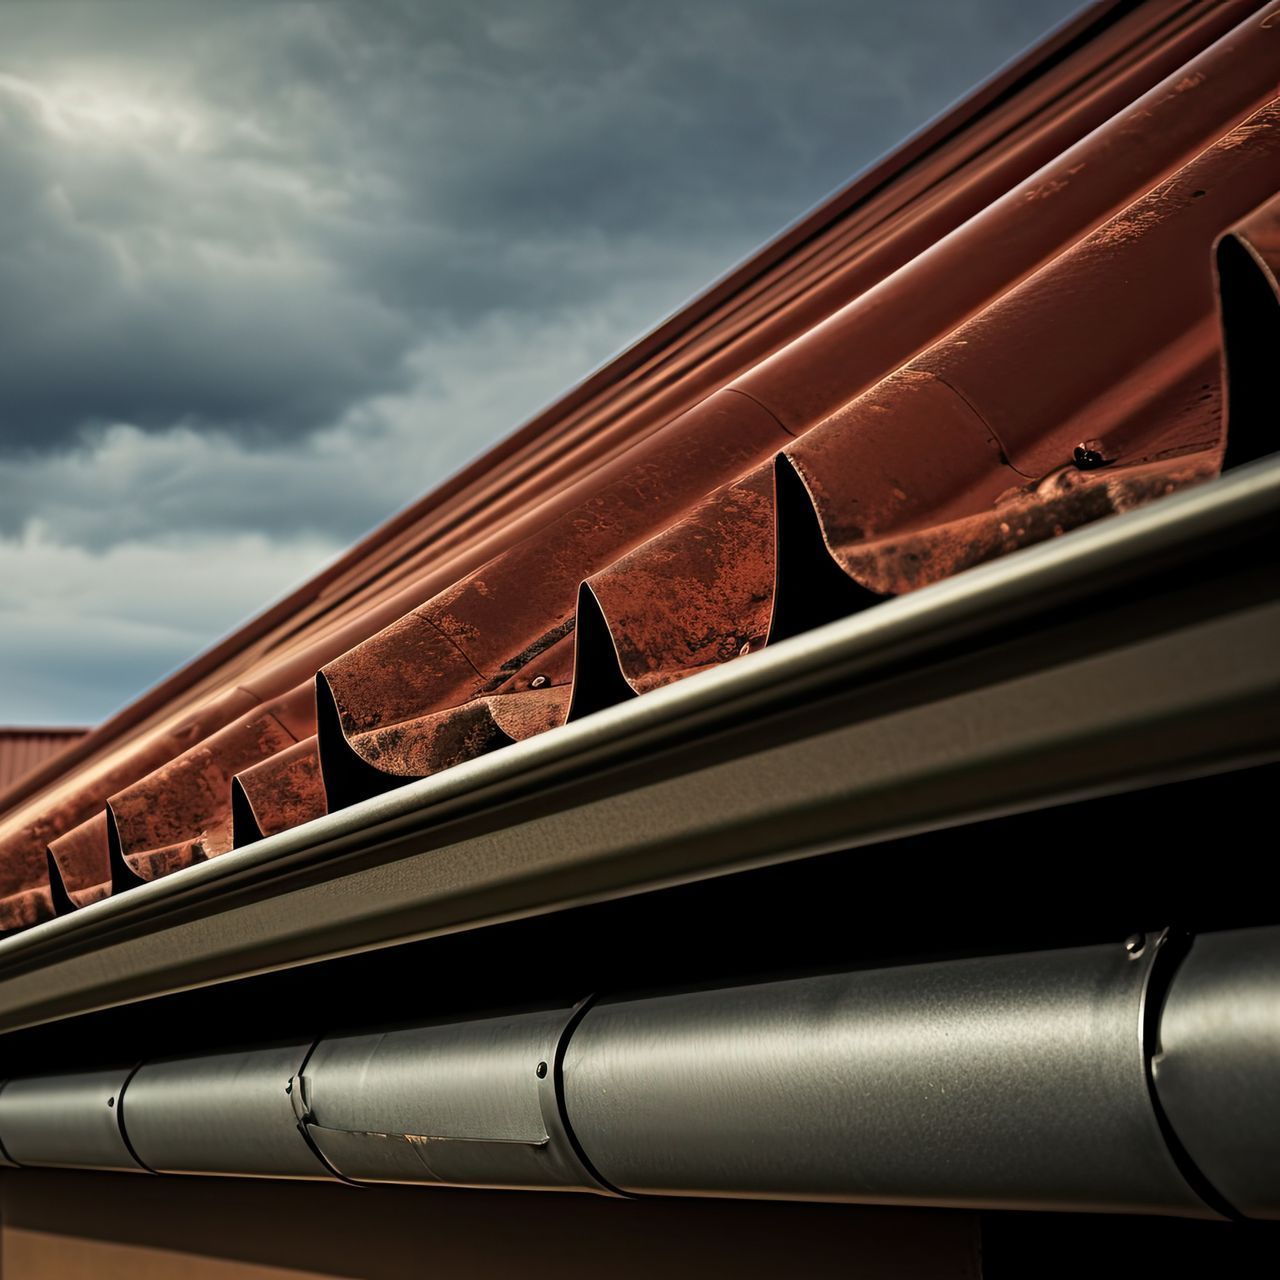 A close up of a gutter on a roof with a cloudy sky in the background